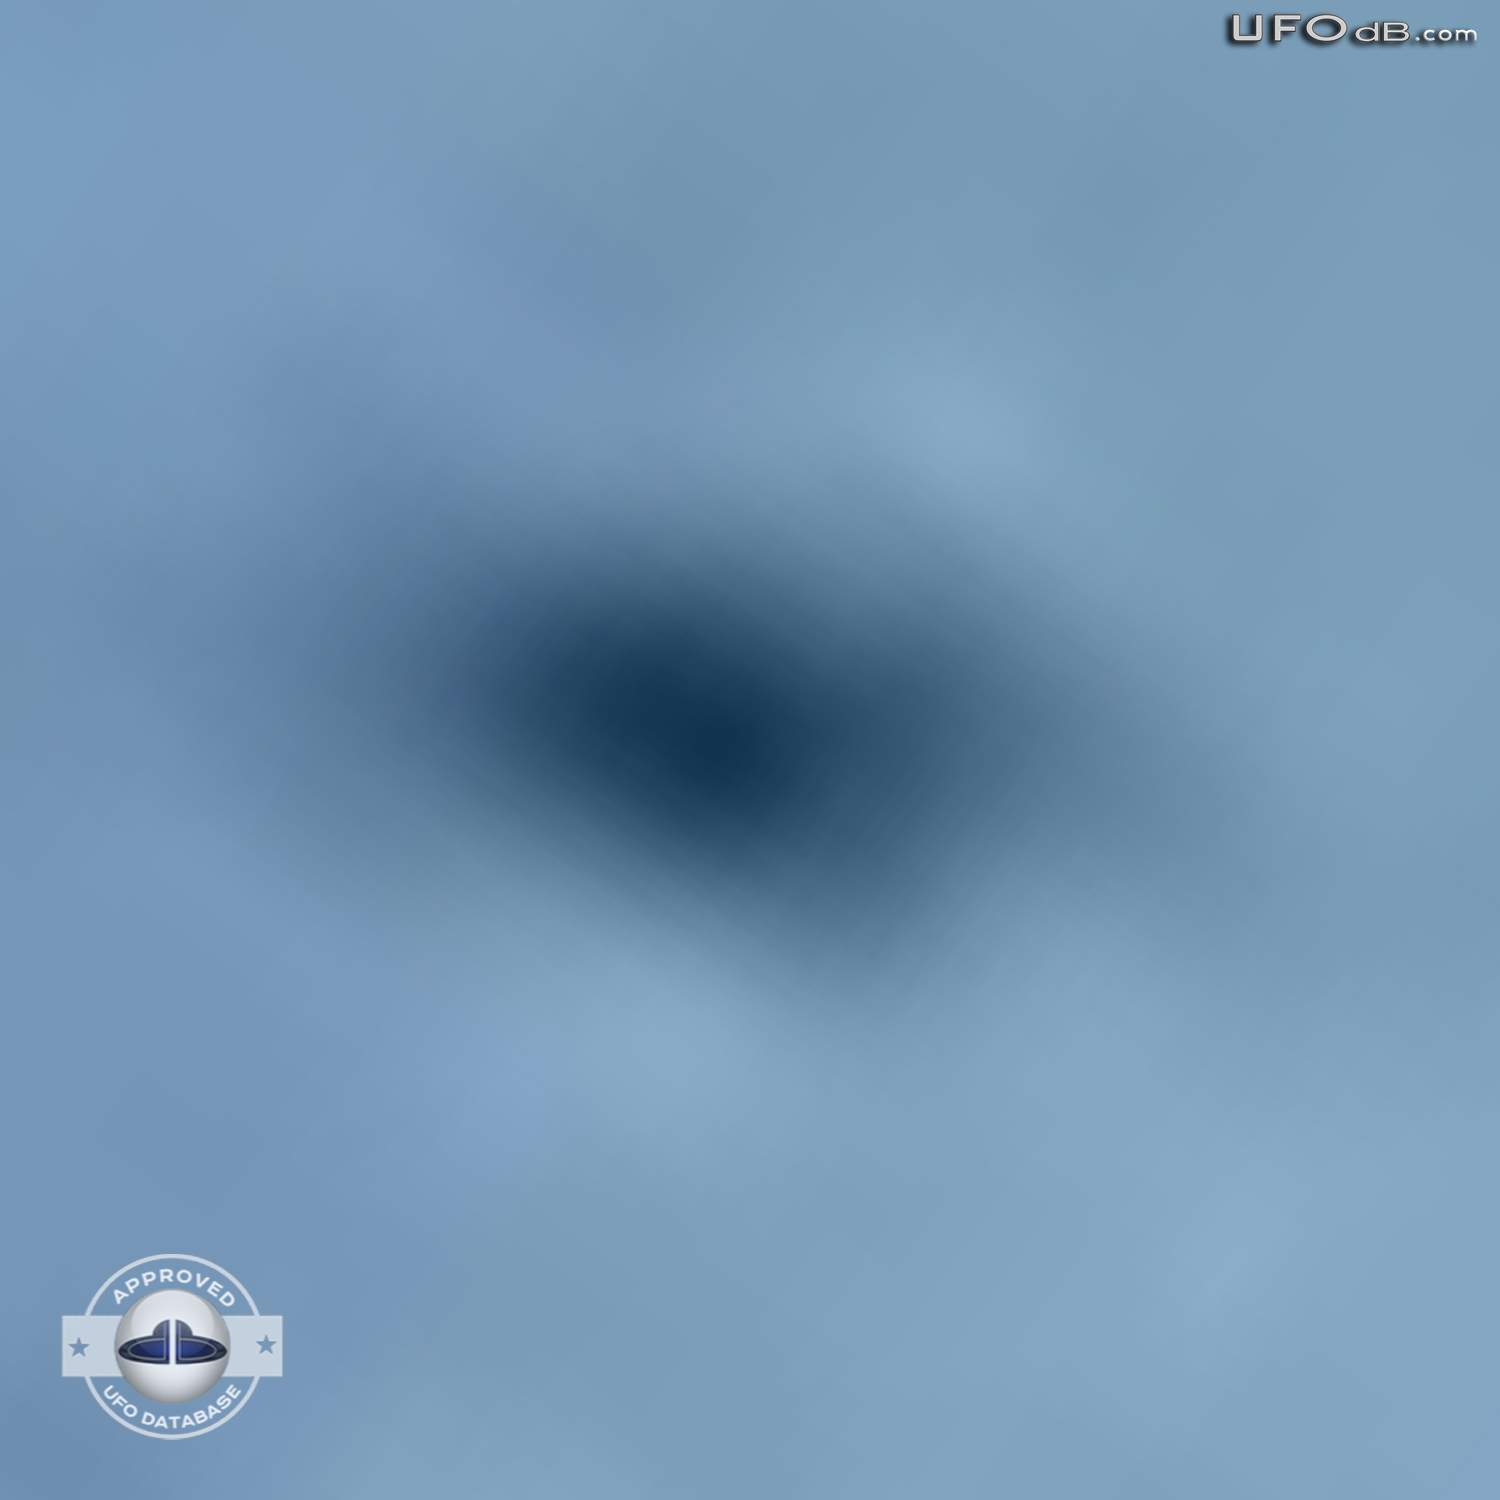 Three months of massive UFO sightings in Argentina | February 20 2011 UFO Picture #267-6